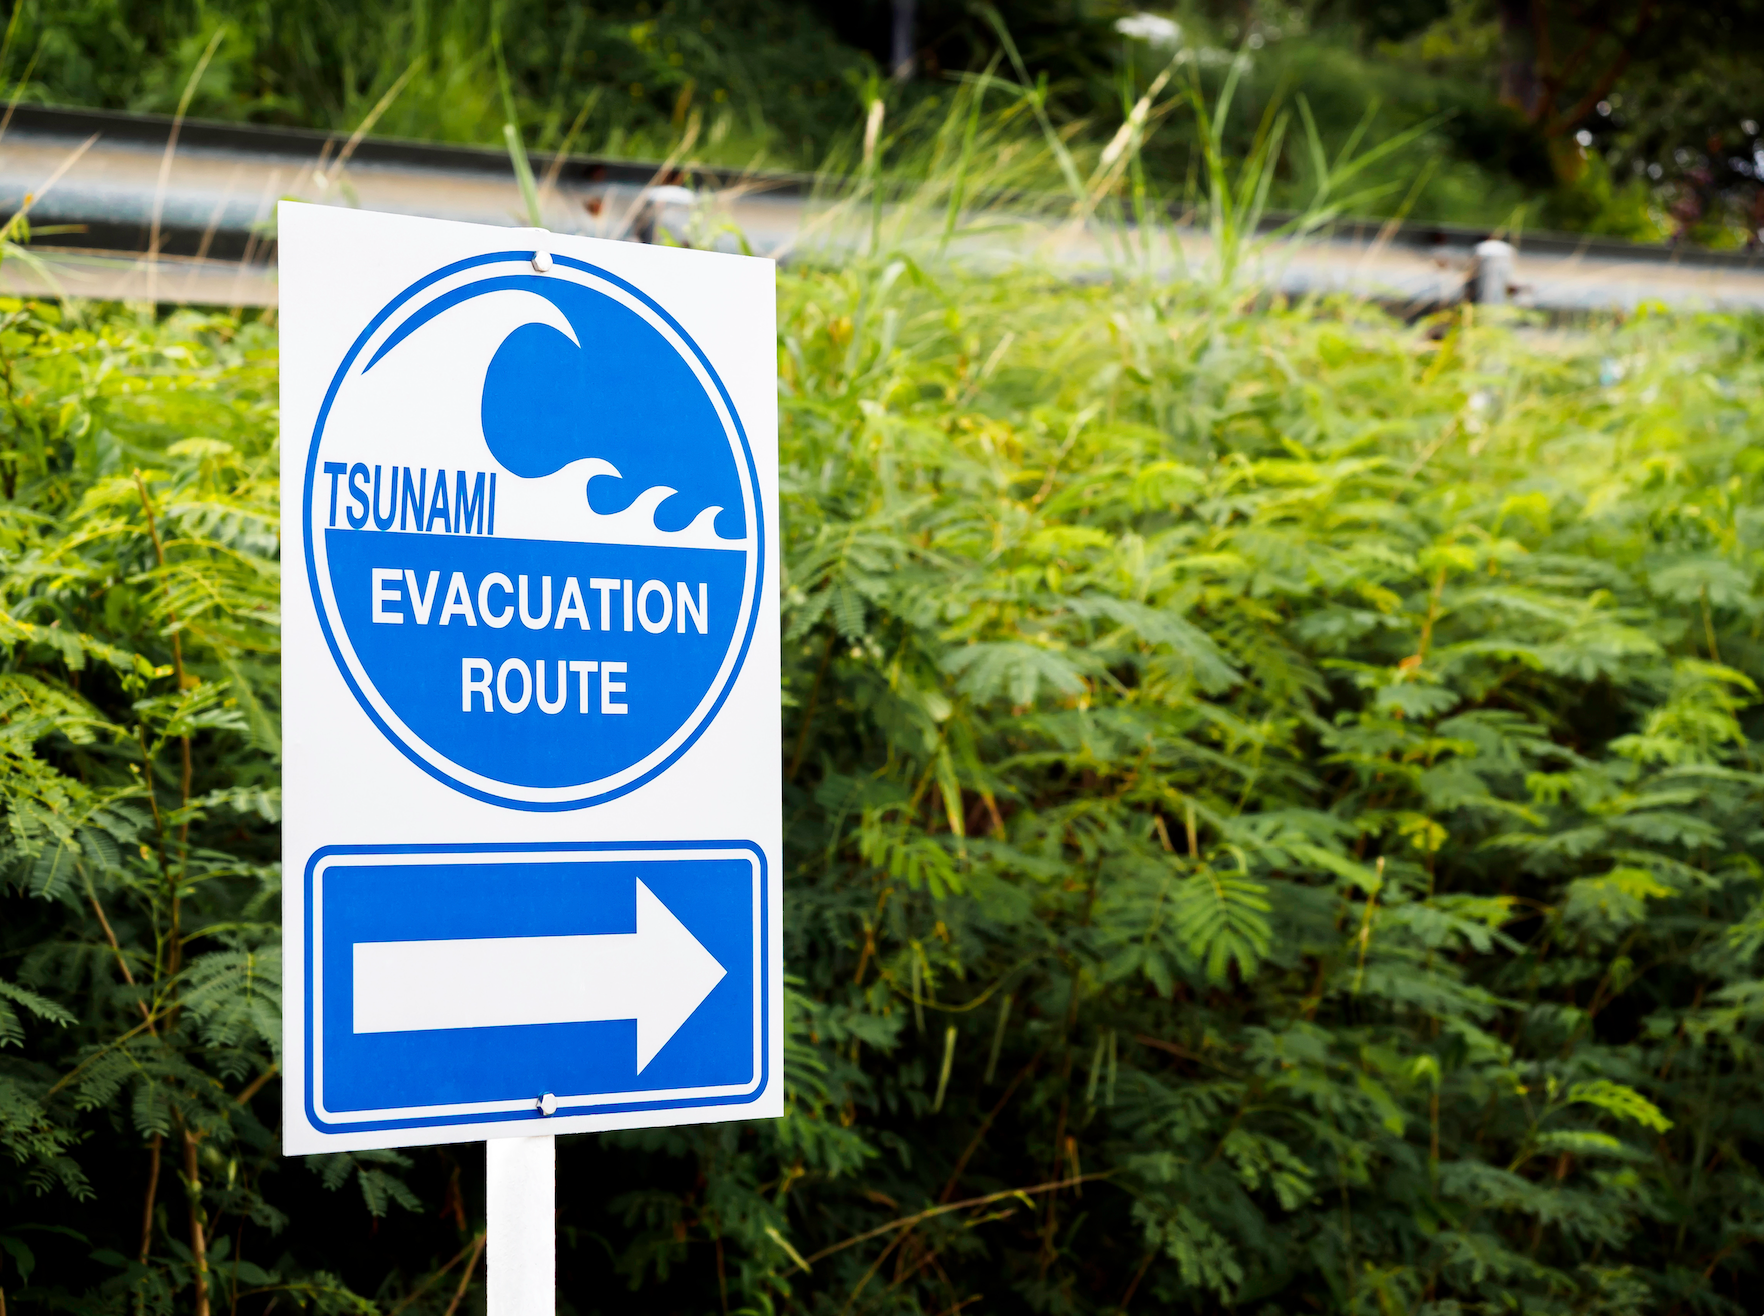 7 Steps for Tsunami Safety at the Beach